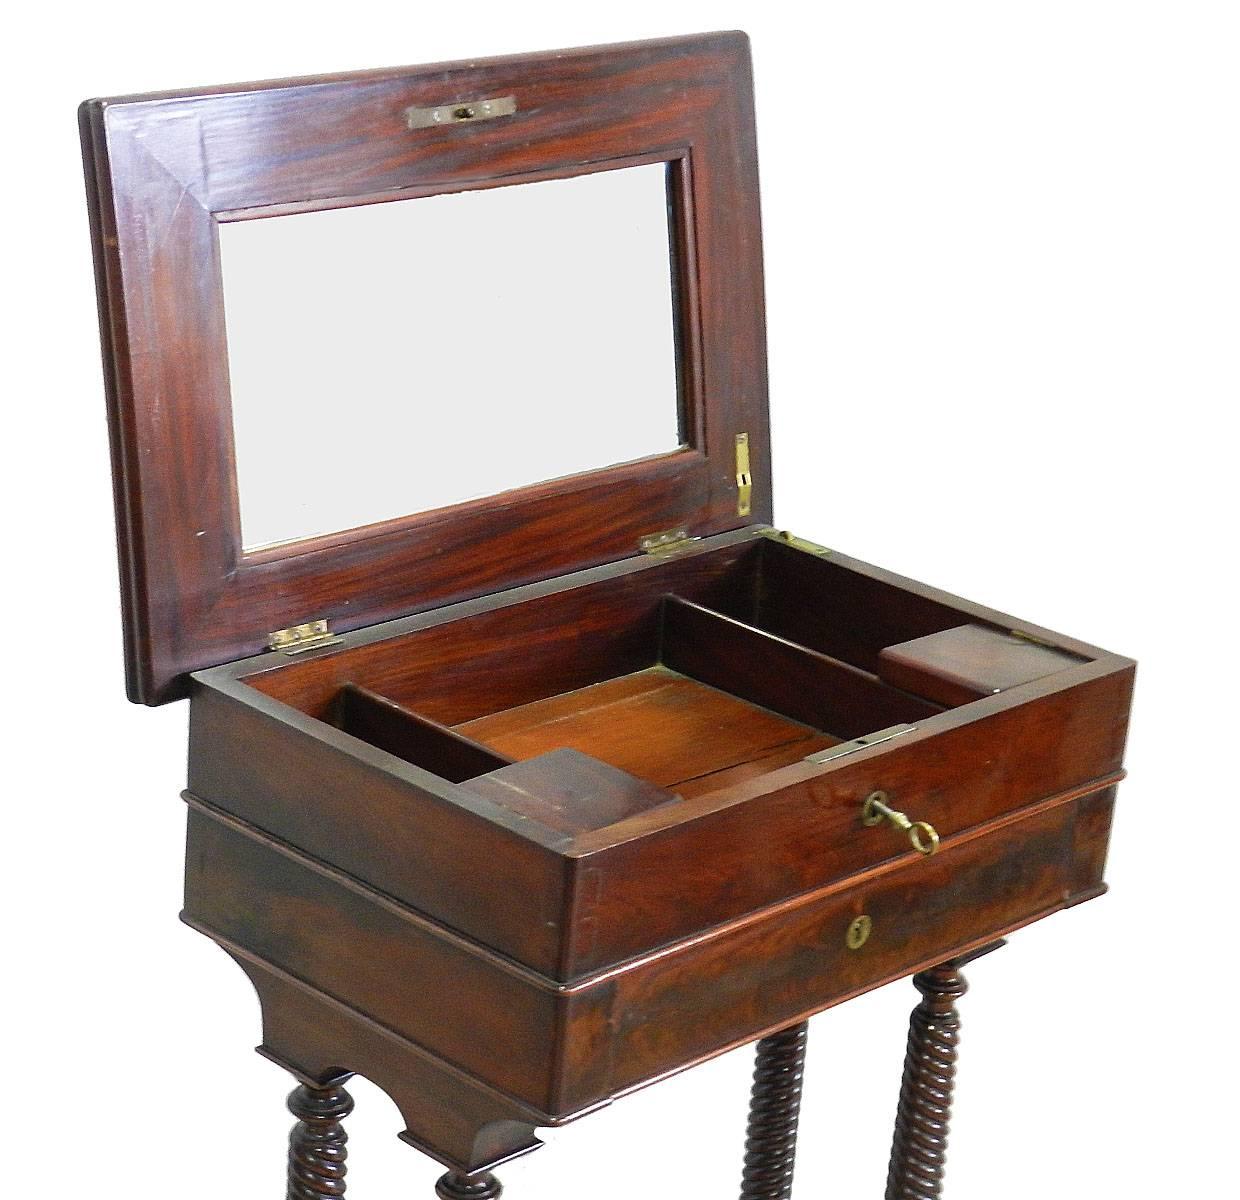 Travailleuse Louis Philippe table desk, French, 19th century writing sewing
flame mahogany
Louis Philippe, circa 1850
Side table or dressing table
Top lifts to reveal original mirror and compartments
Underneath is a drawer with its original